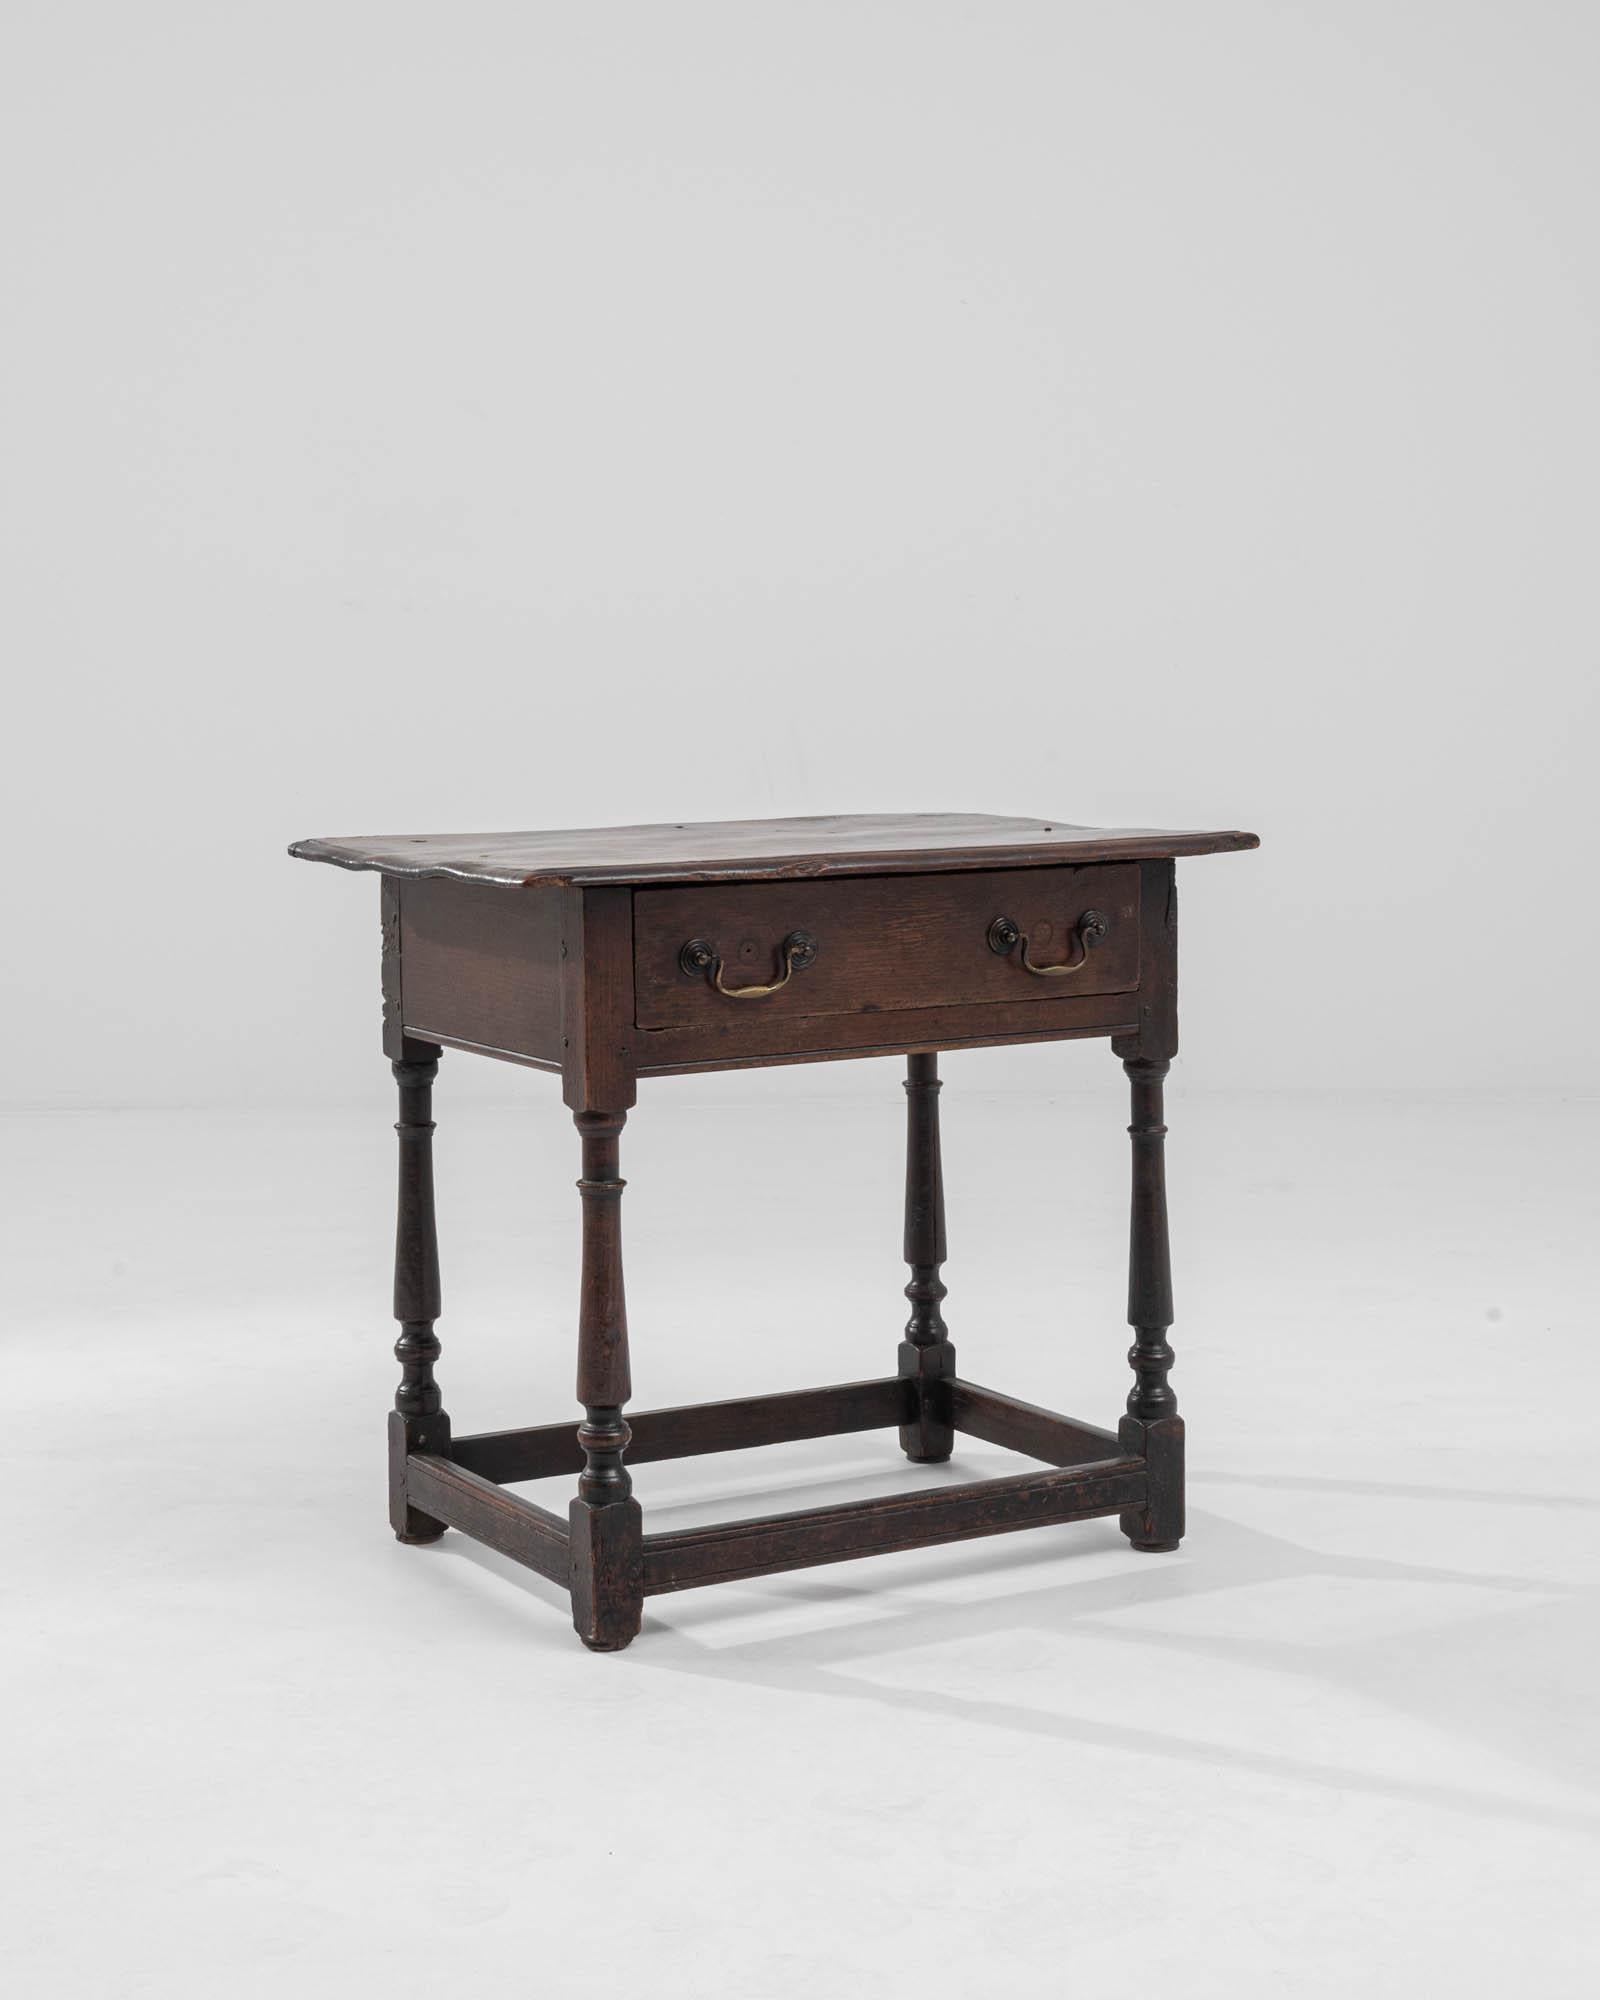 An oak table made in the 19th century United Kingdom. The gently organic shape of this table’s top contrasts in compelling fashion with the ornately lathed legs and tidy construction that undergirds it. The rich and warm brown wood emits an aura of